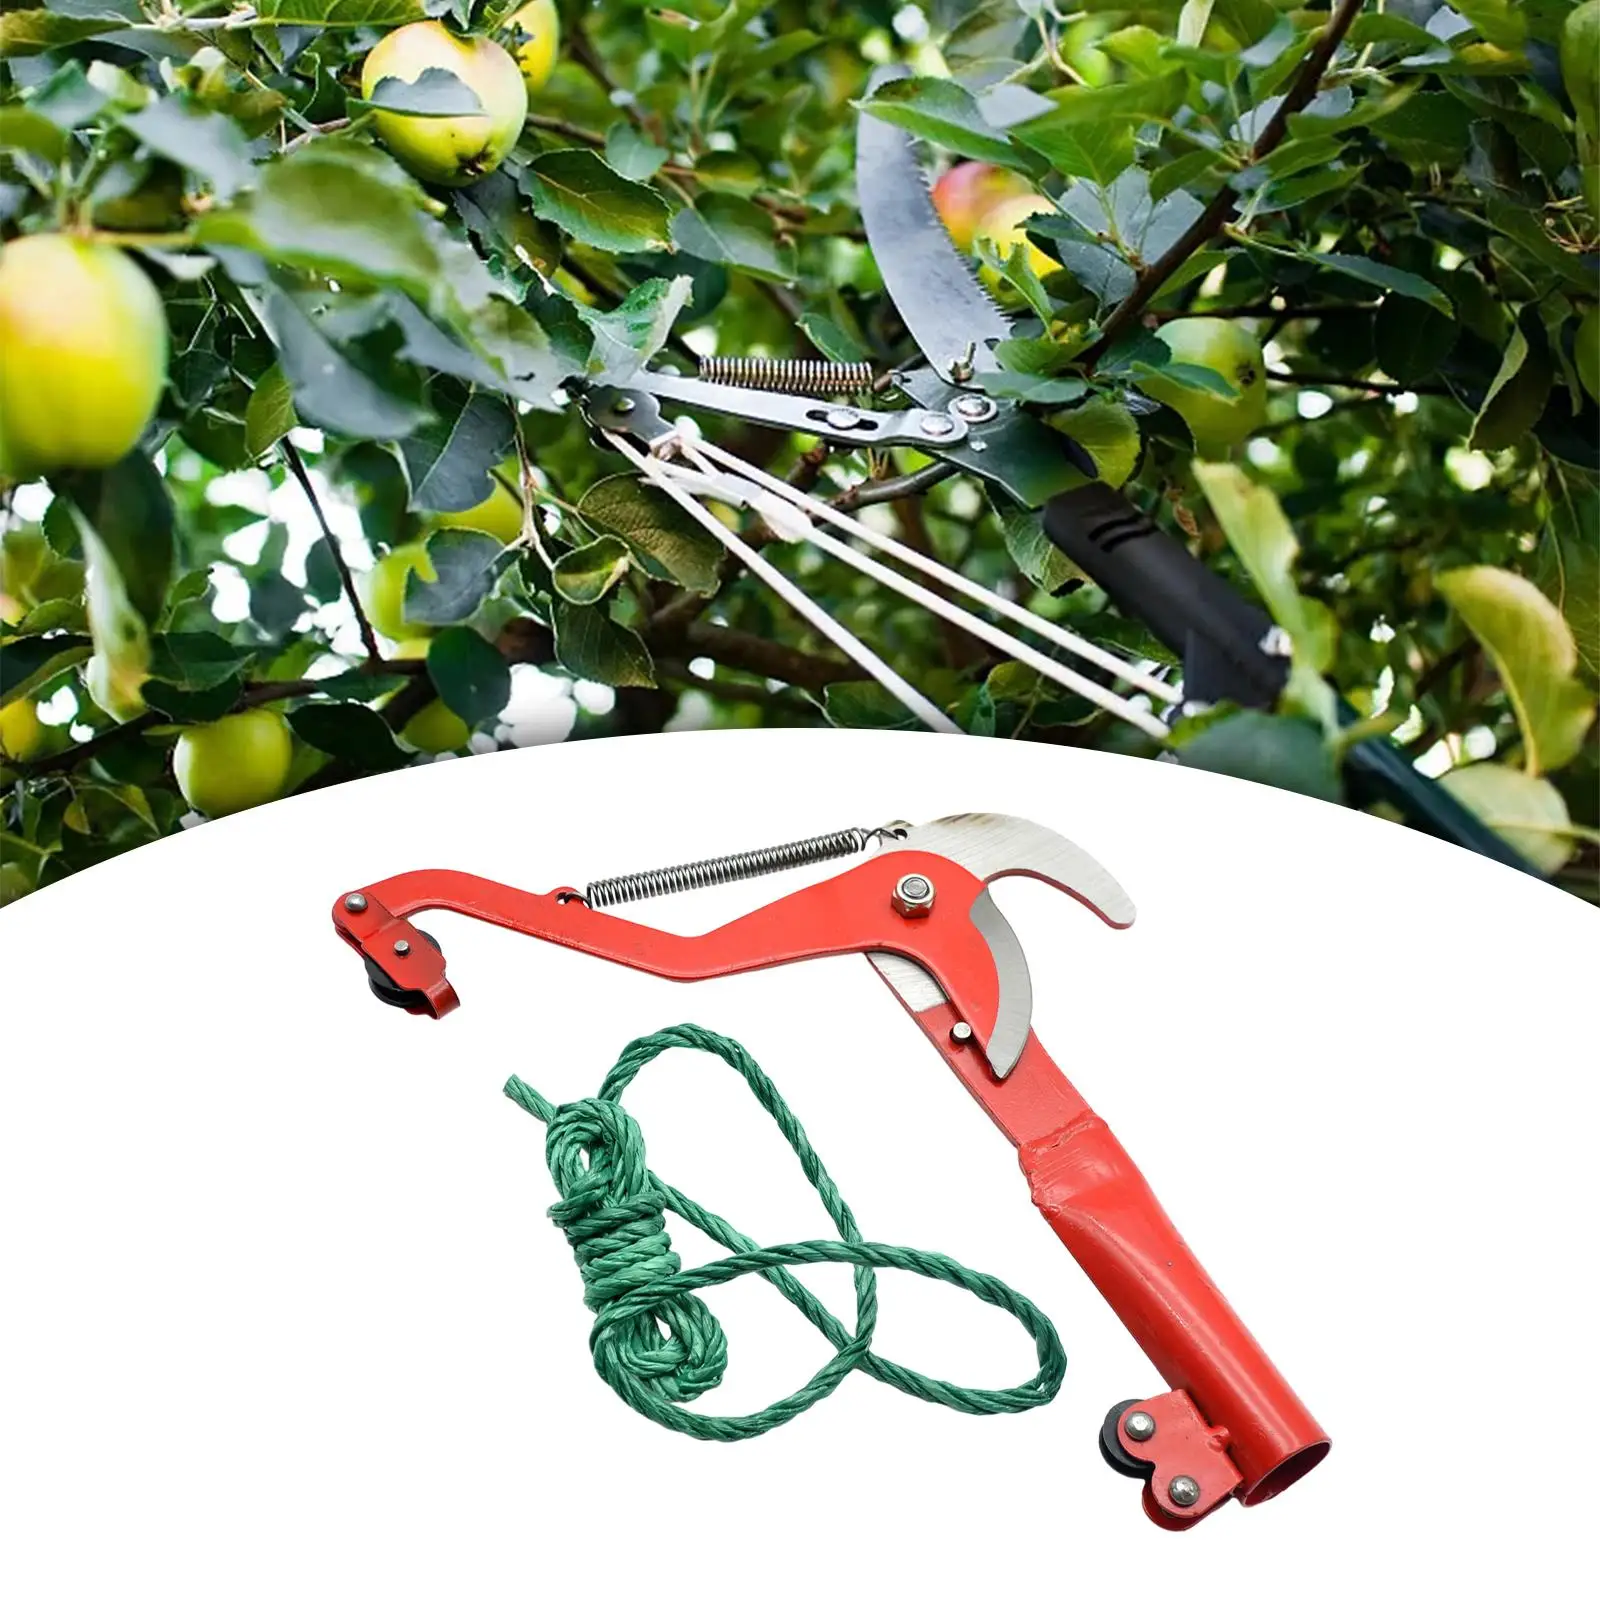 High Altitude Pruning Shear Professional with Rope Garden Tools Garden Shear for Garden Agricultural Cutting Branches